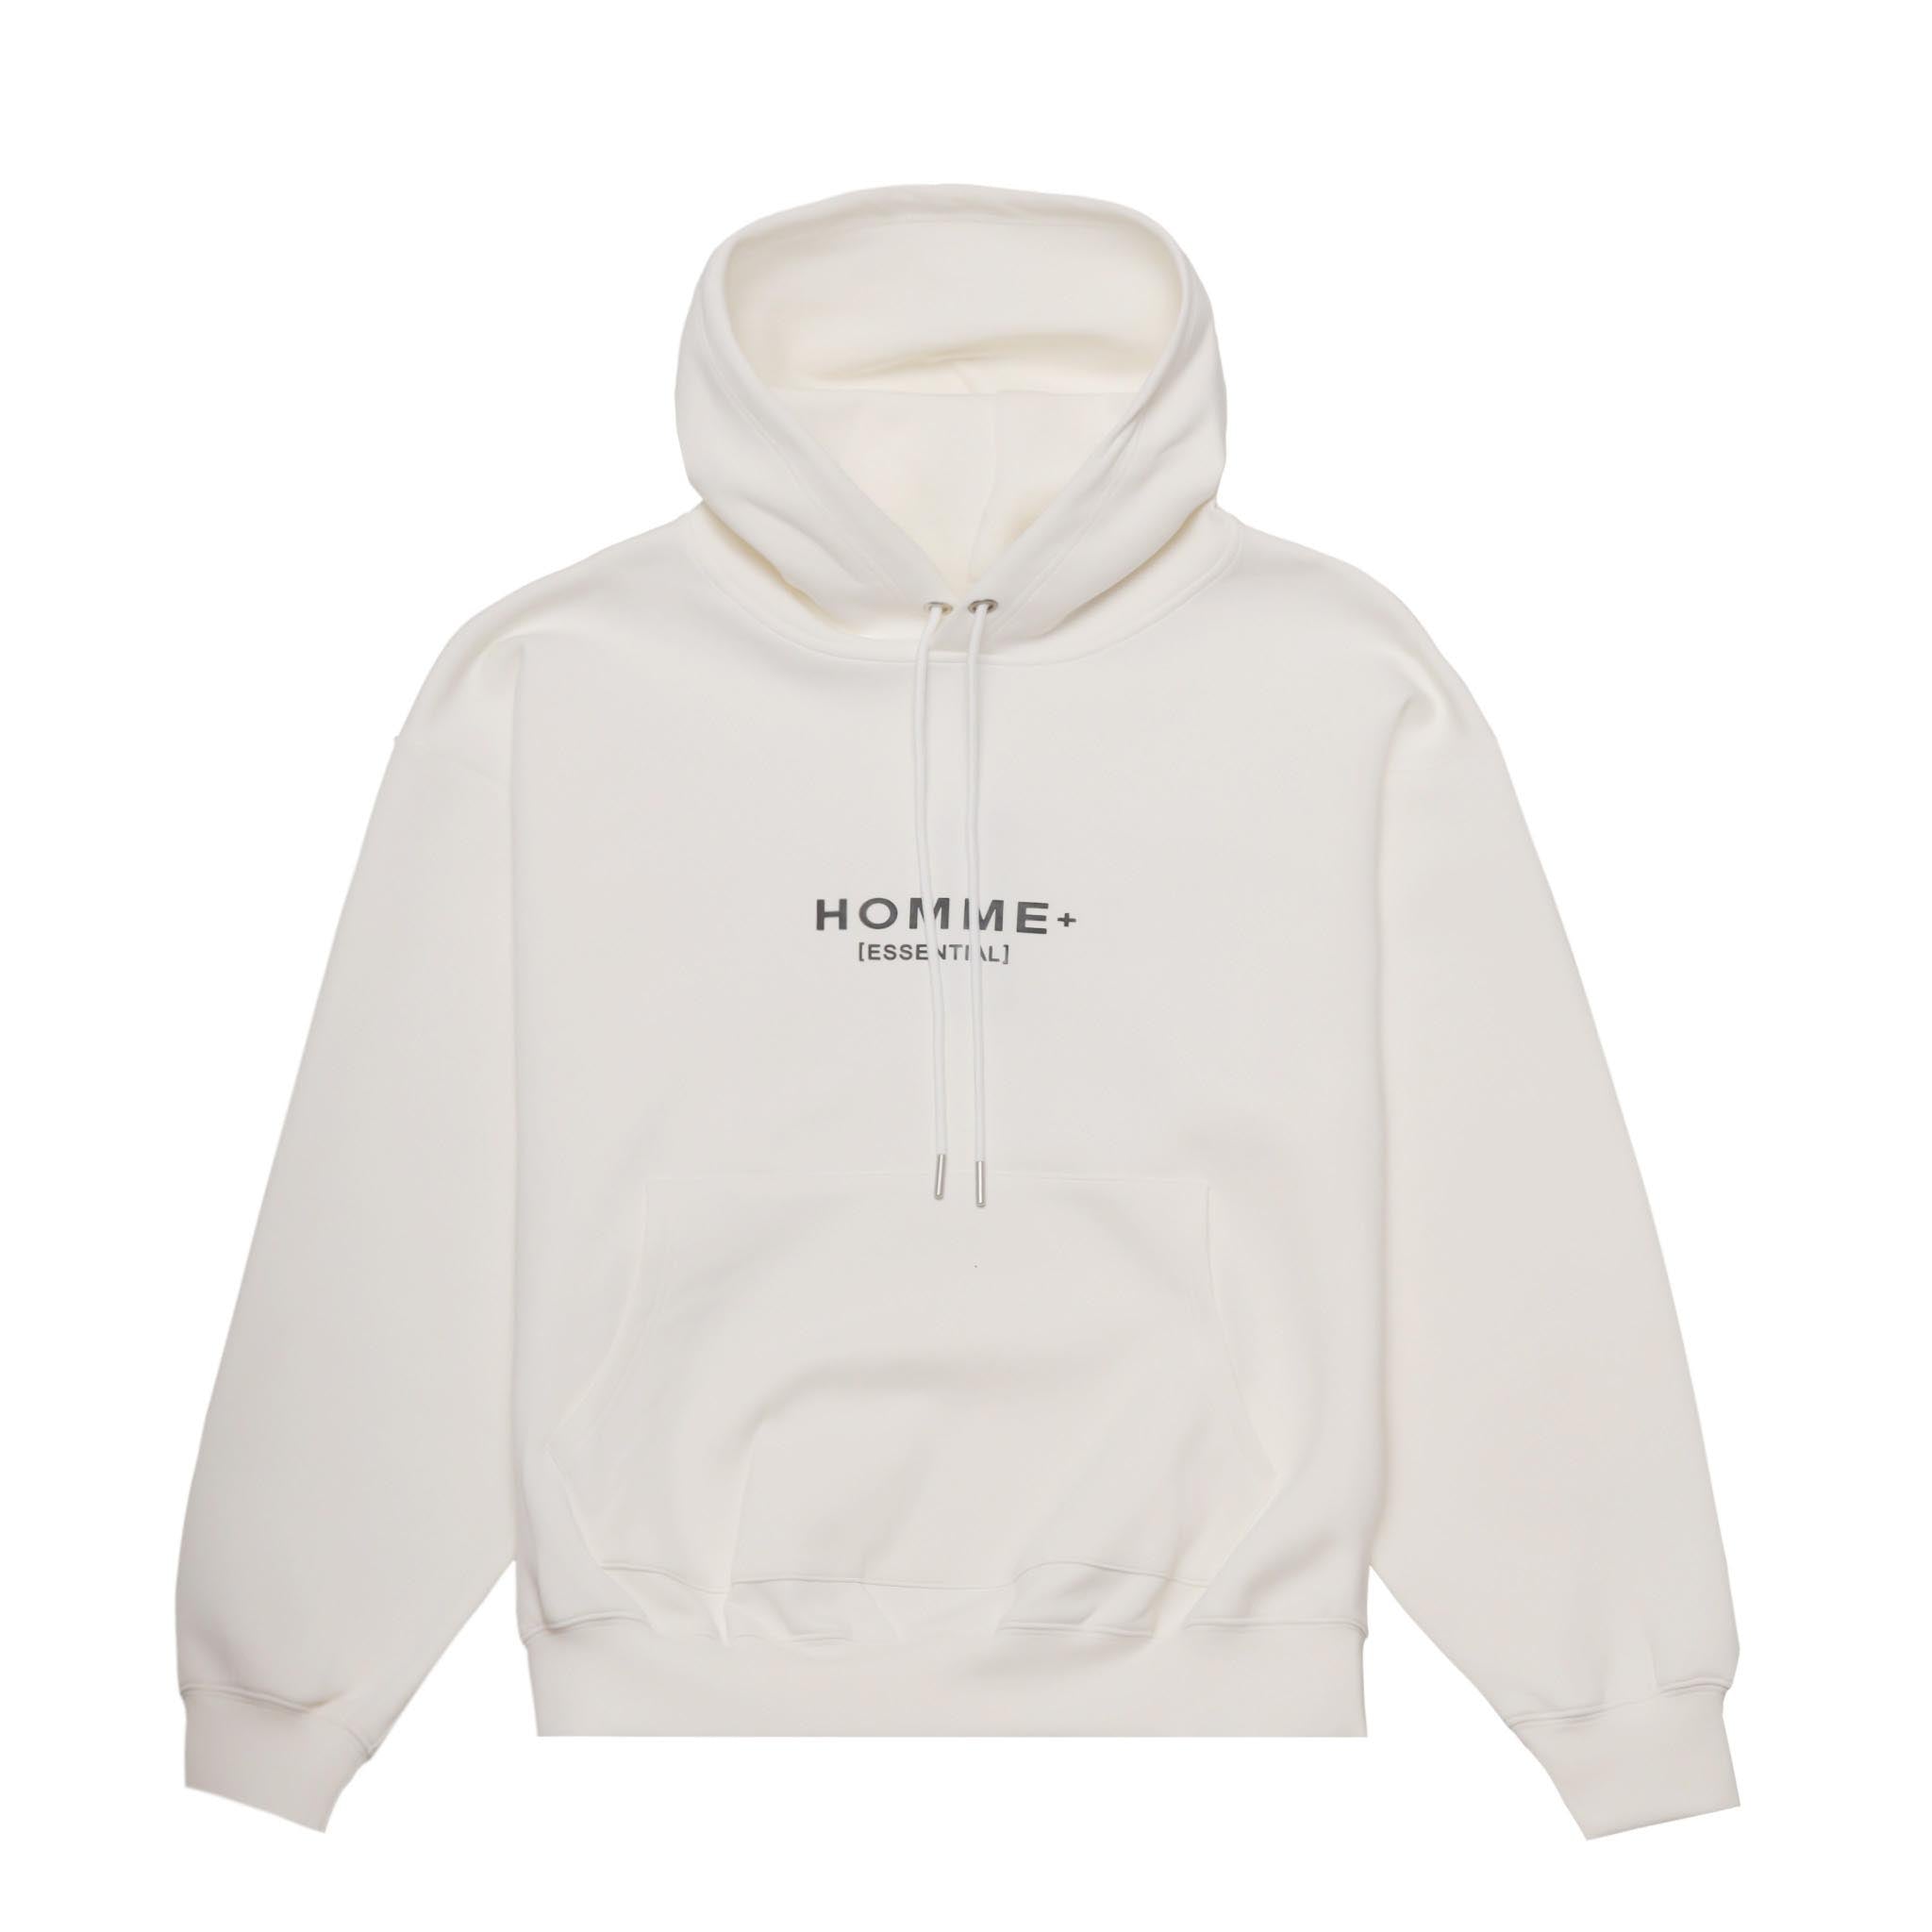 L Fear Of God Essentials Hoodie White